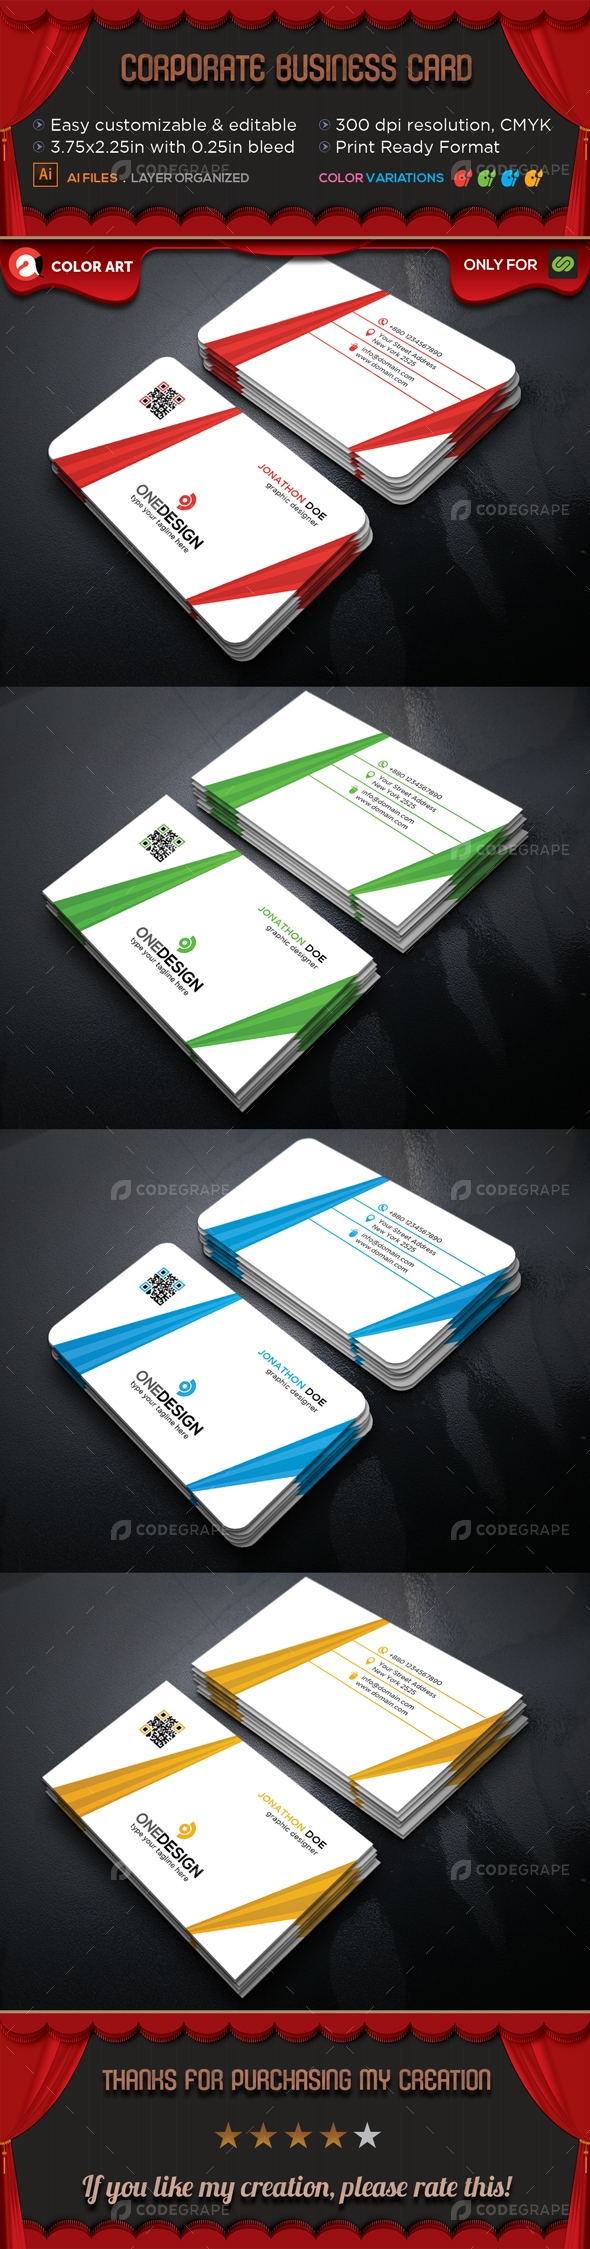 Corporate Business Card V.2